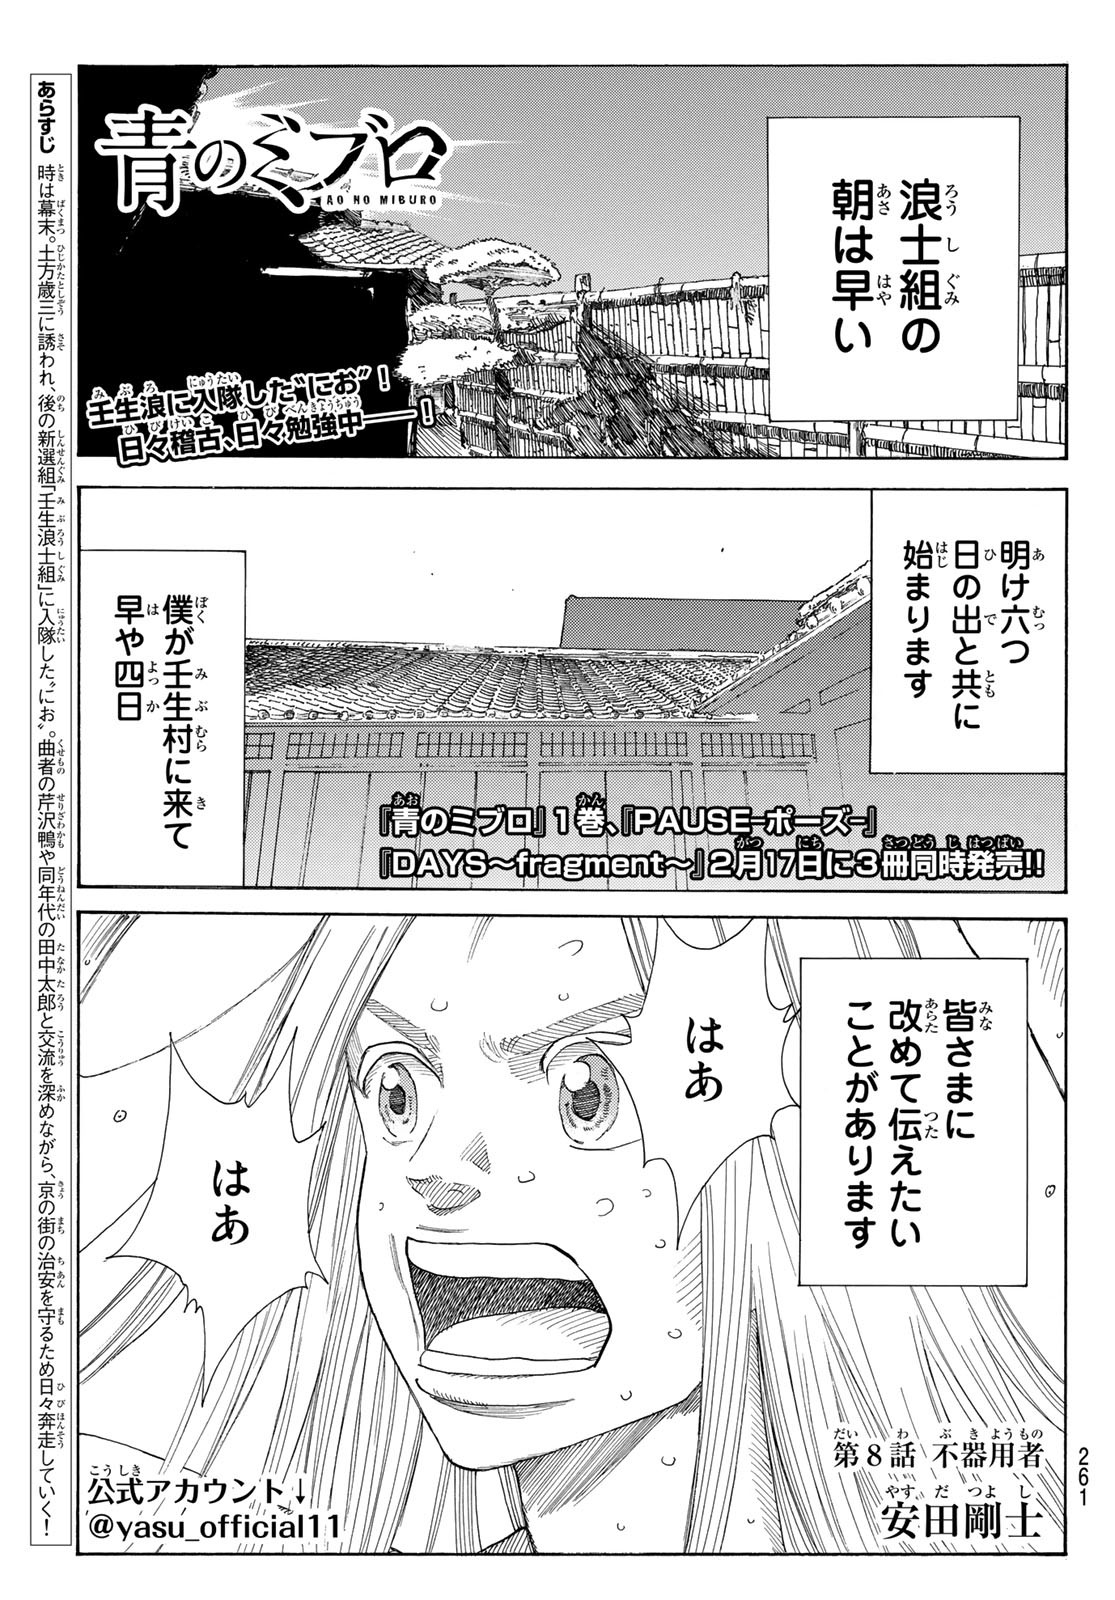 An Mo Miburo 第8話 - Page 1